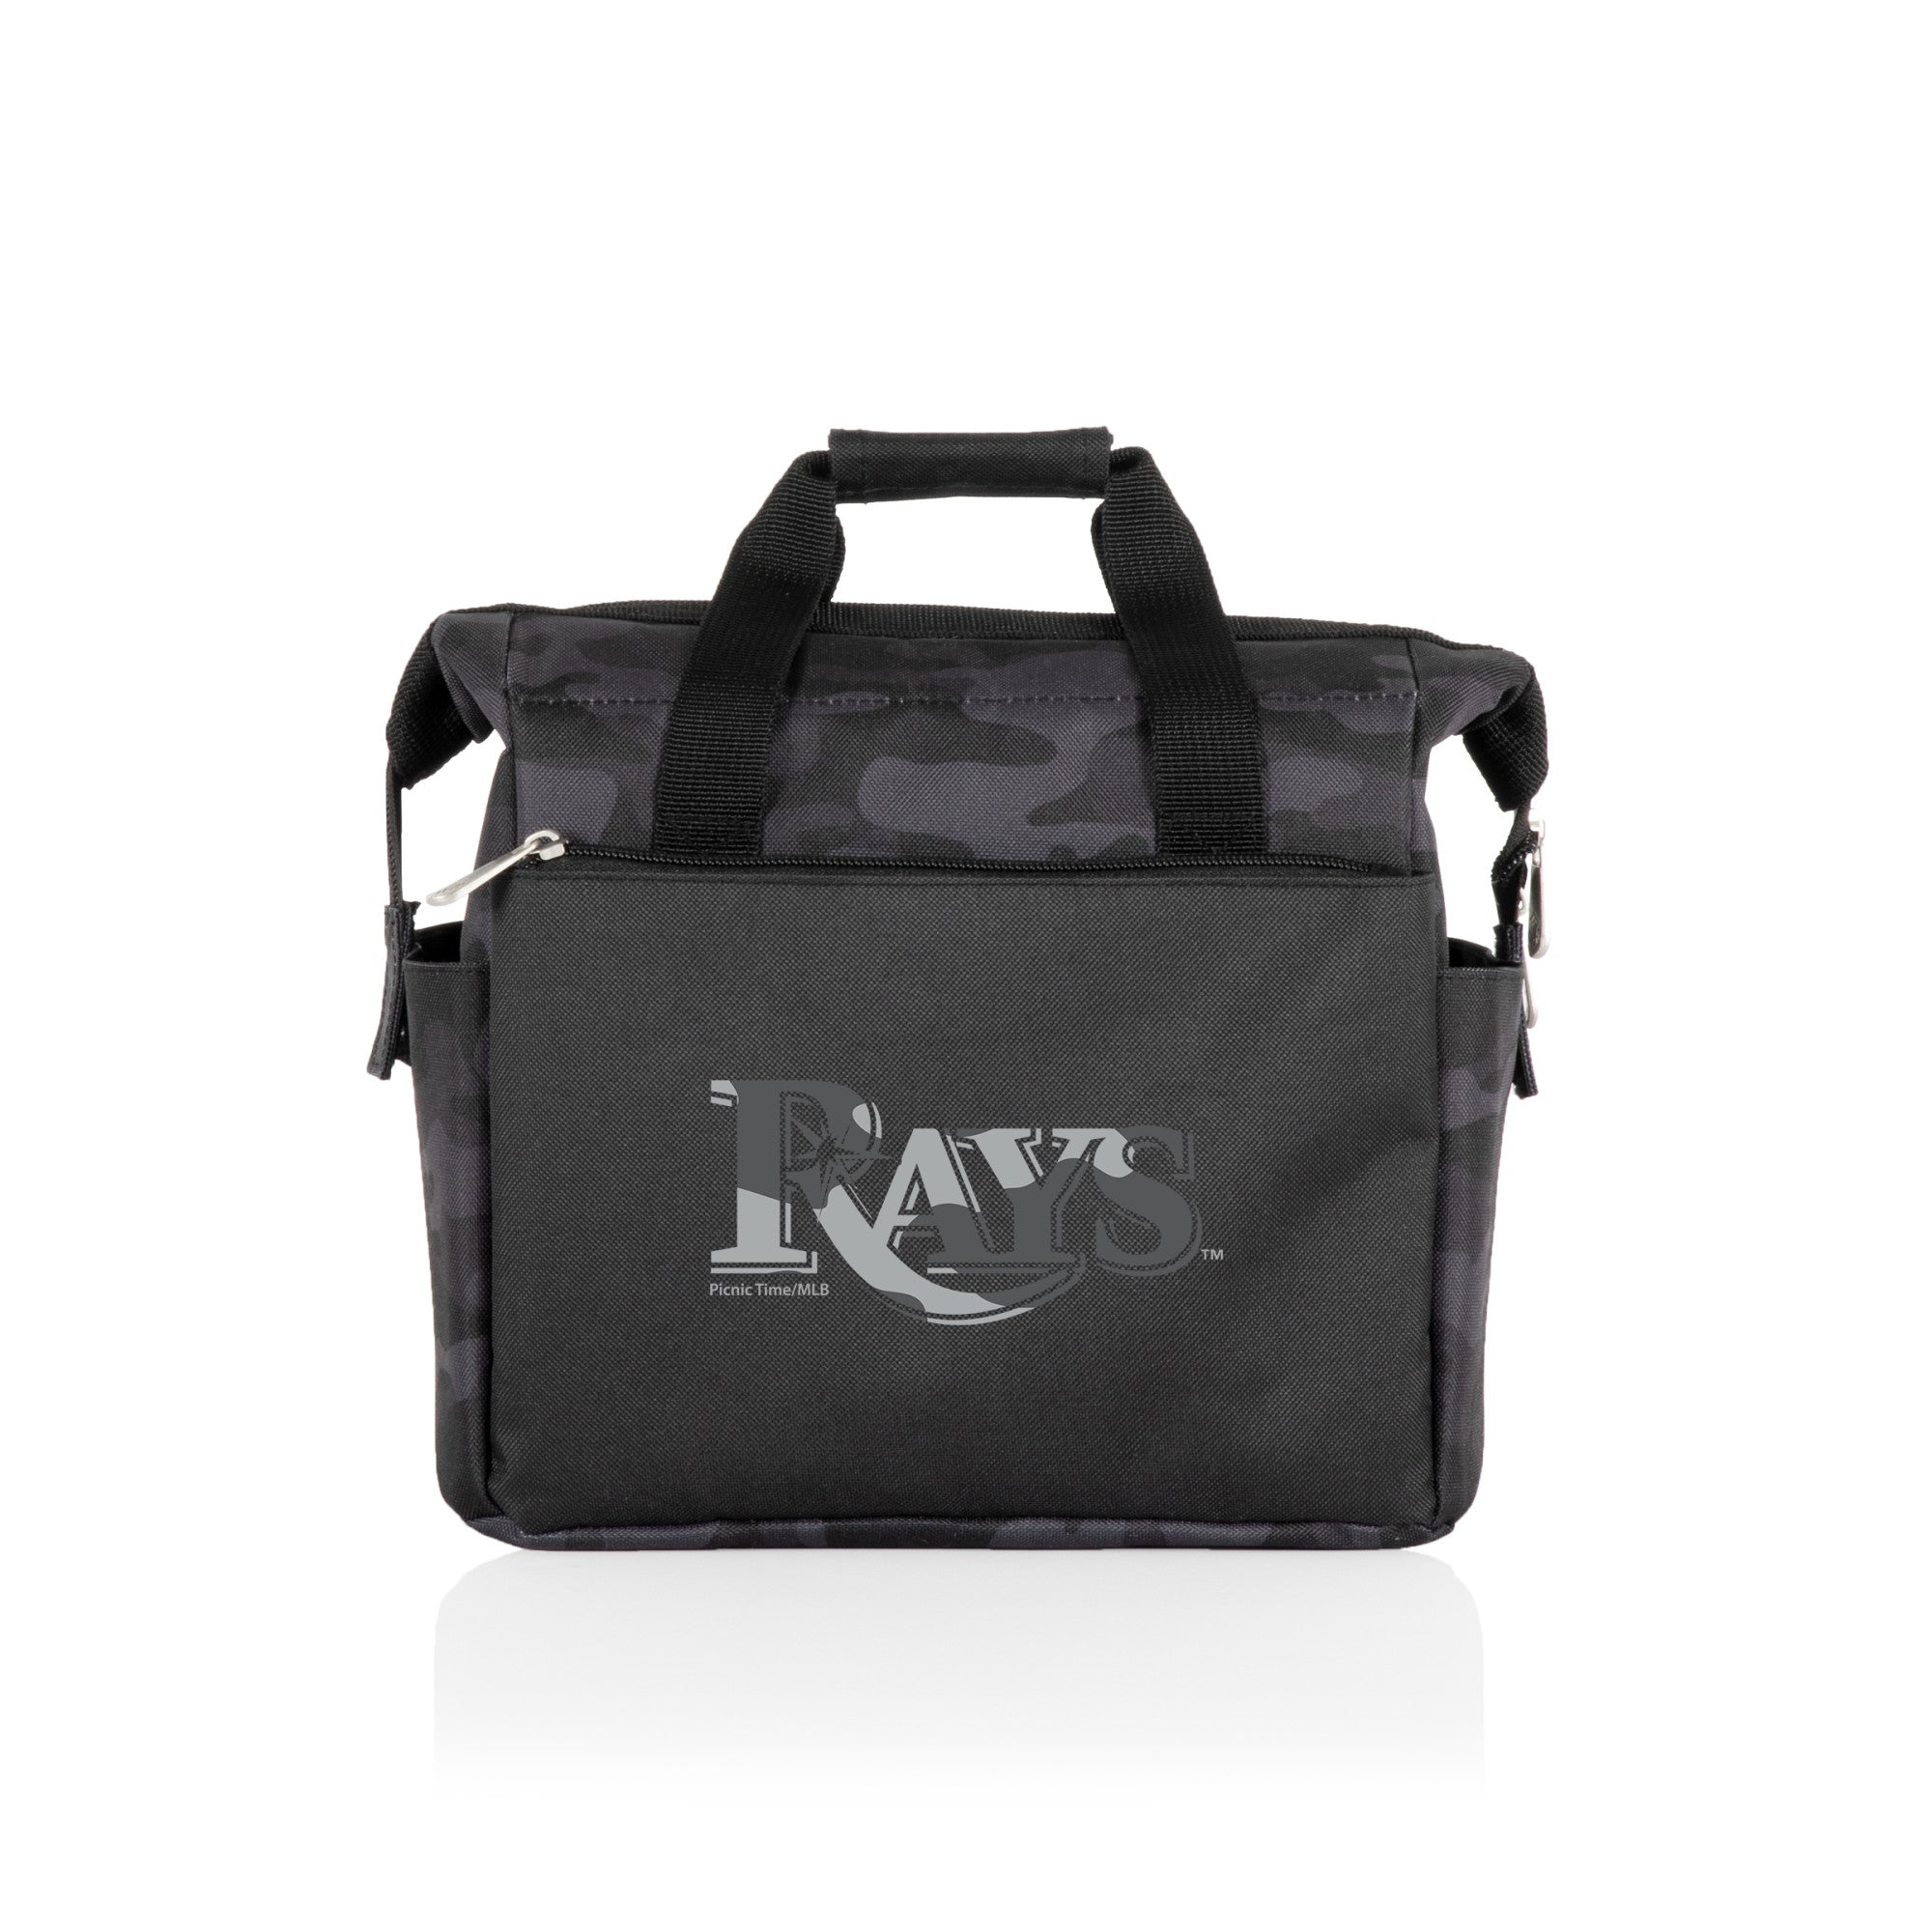 Tampa Bay Rays - On The Go Lunch Bag Cooler